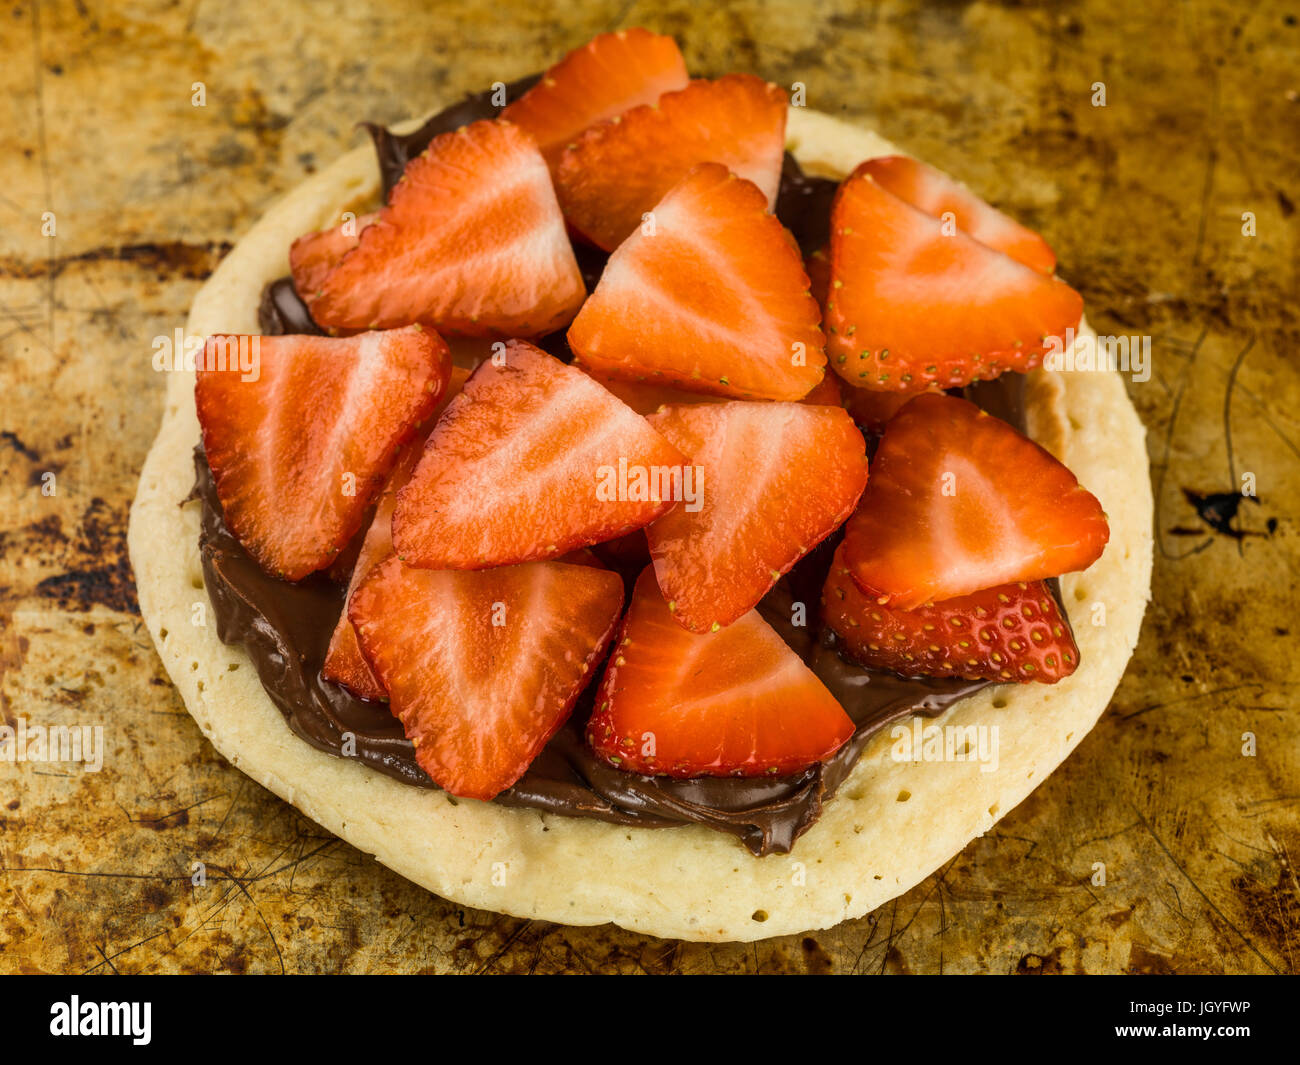 Pancake With Strawberries and Chocolate Spread Sitting on an Over Tray Stock Photo